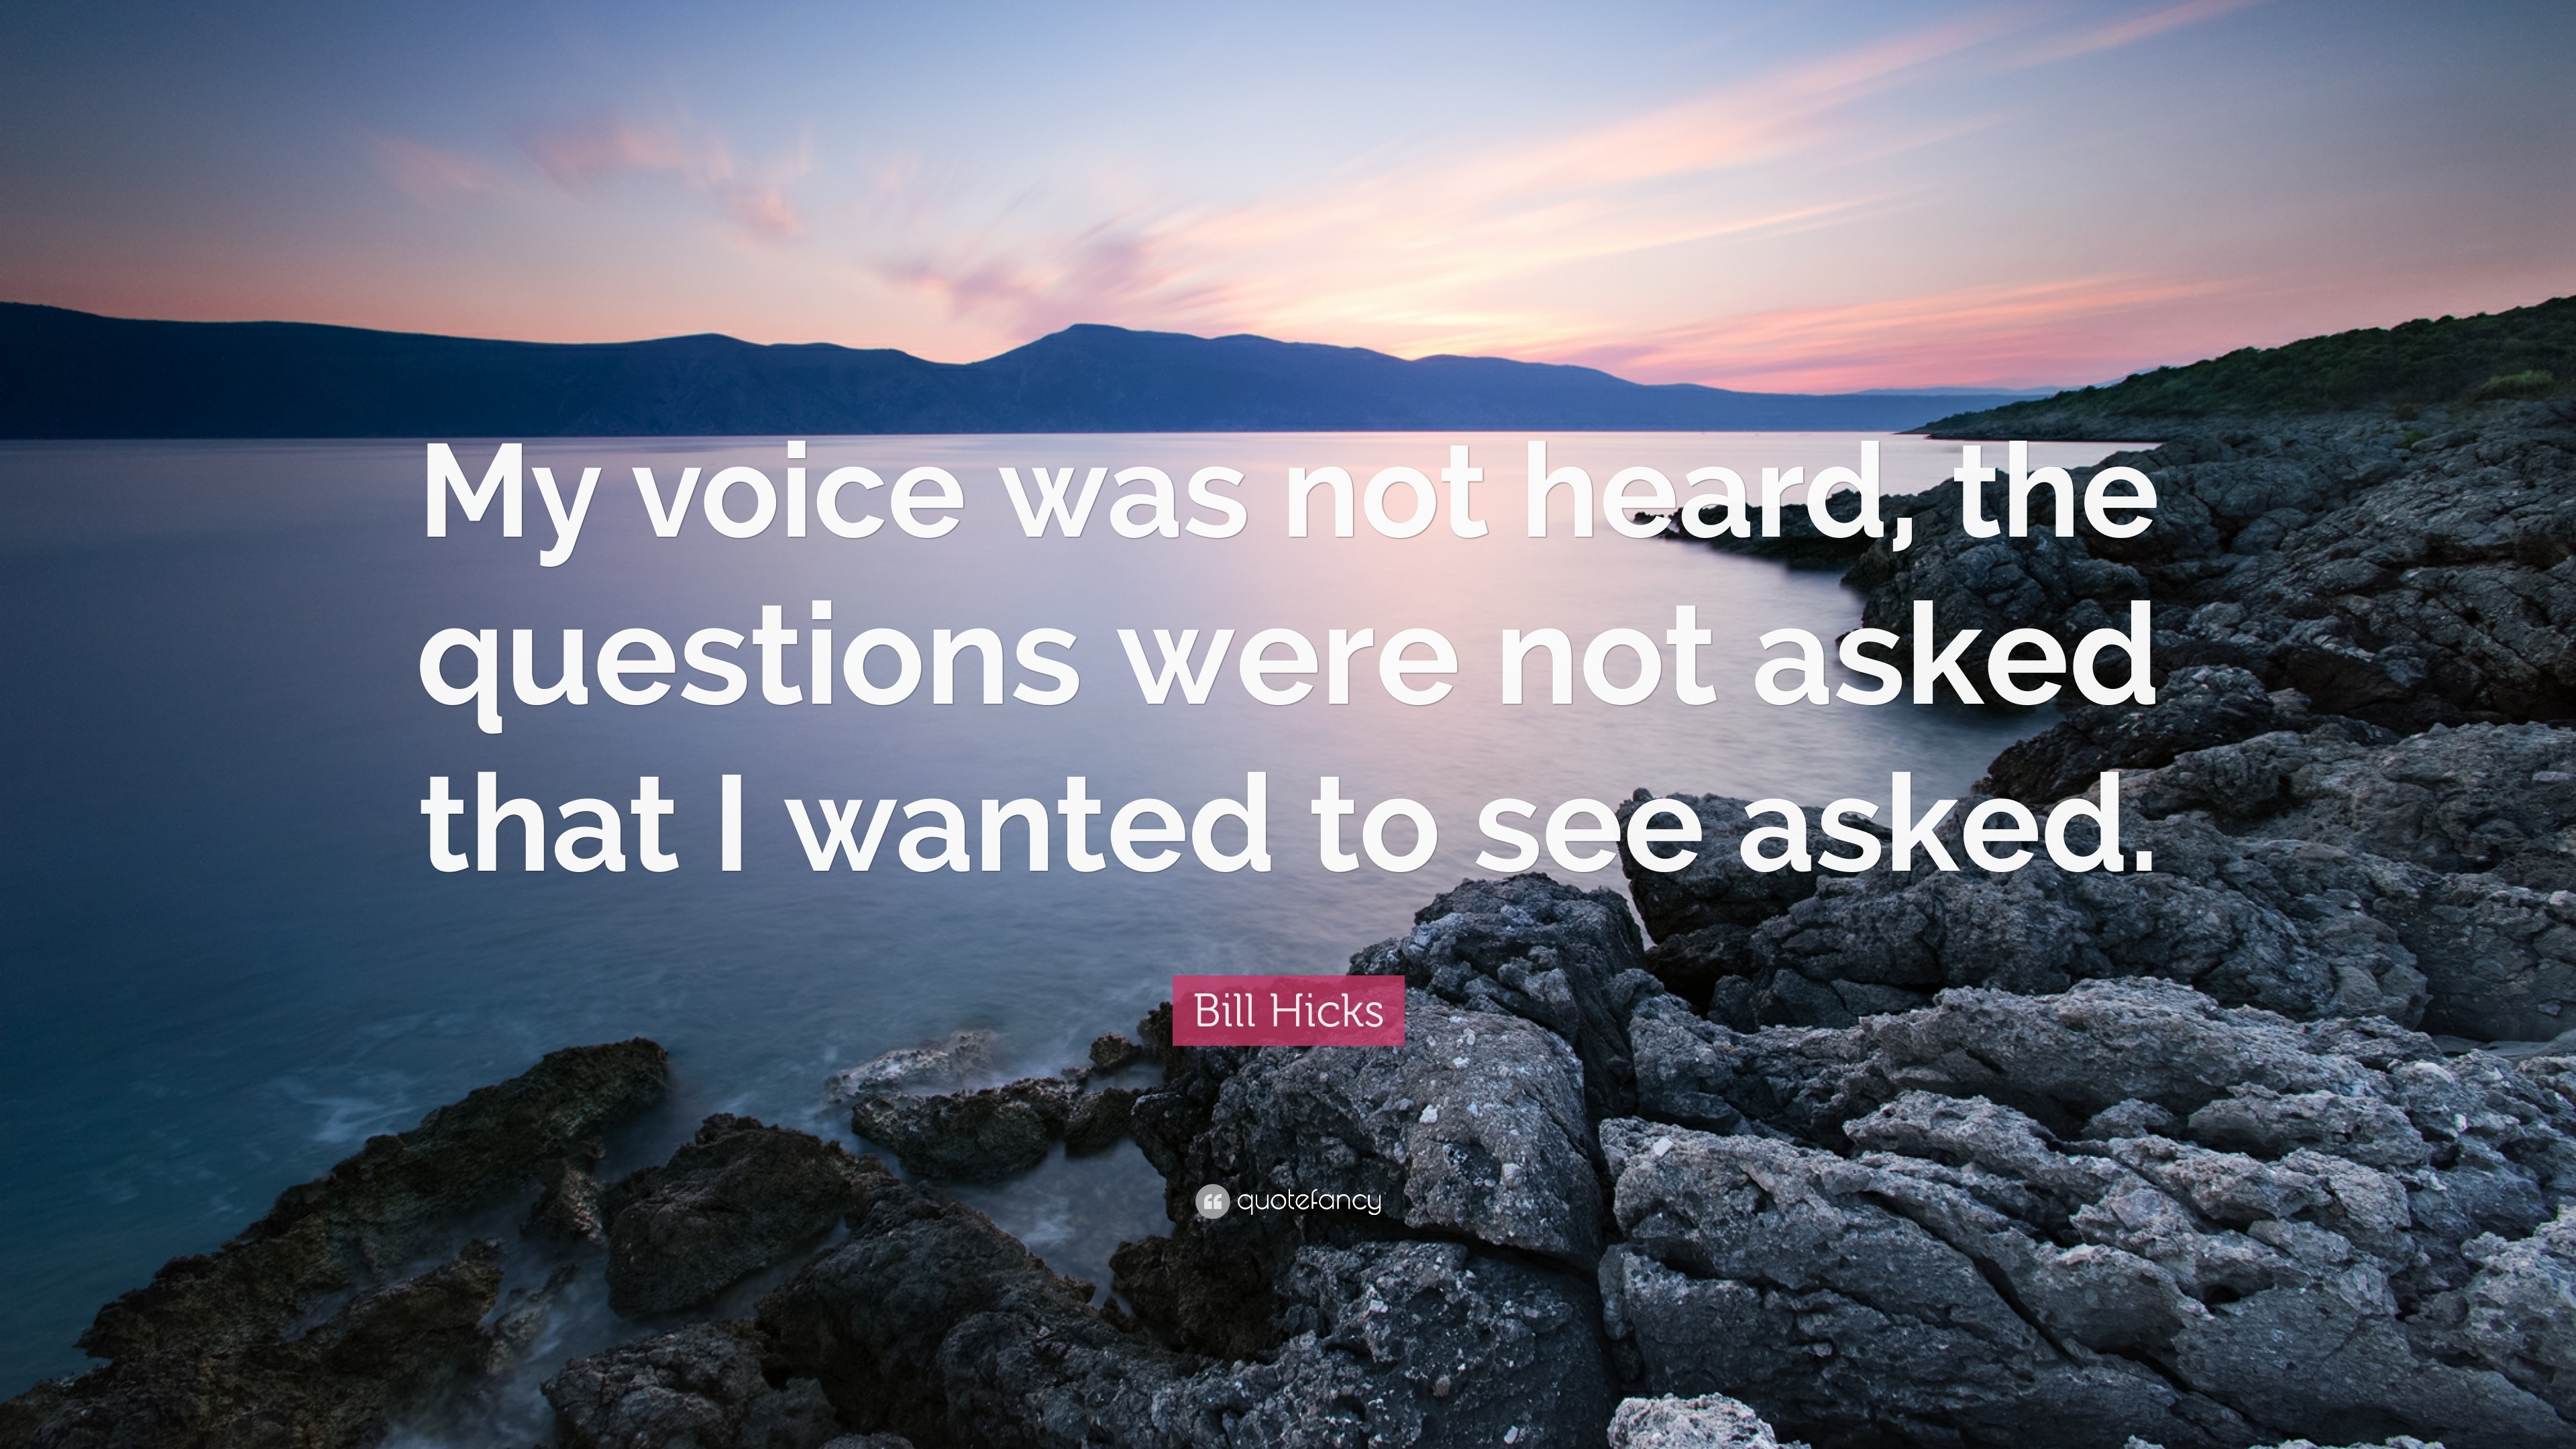 https://quotefancy.com/media/wallpaper/3840x2160/245115-Bill-Hicks-Quote-My-voice-was-not-heard-the-questions-were-not.jpg